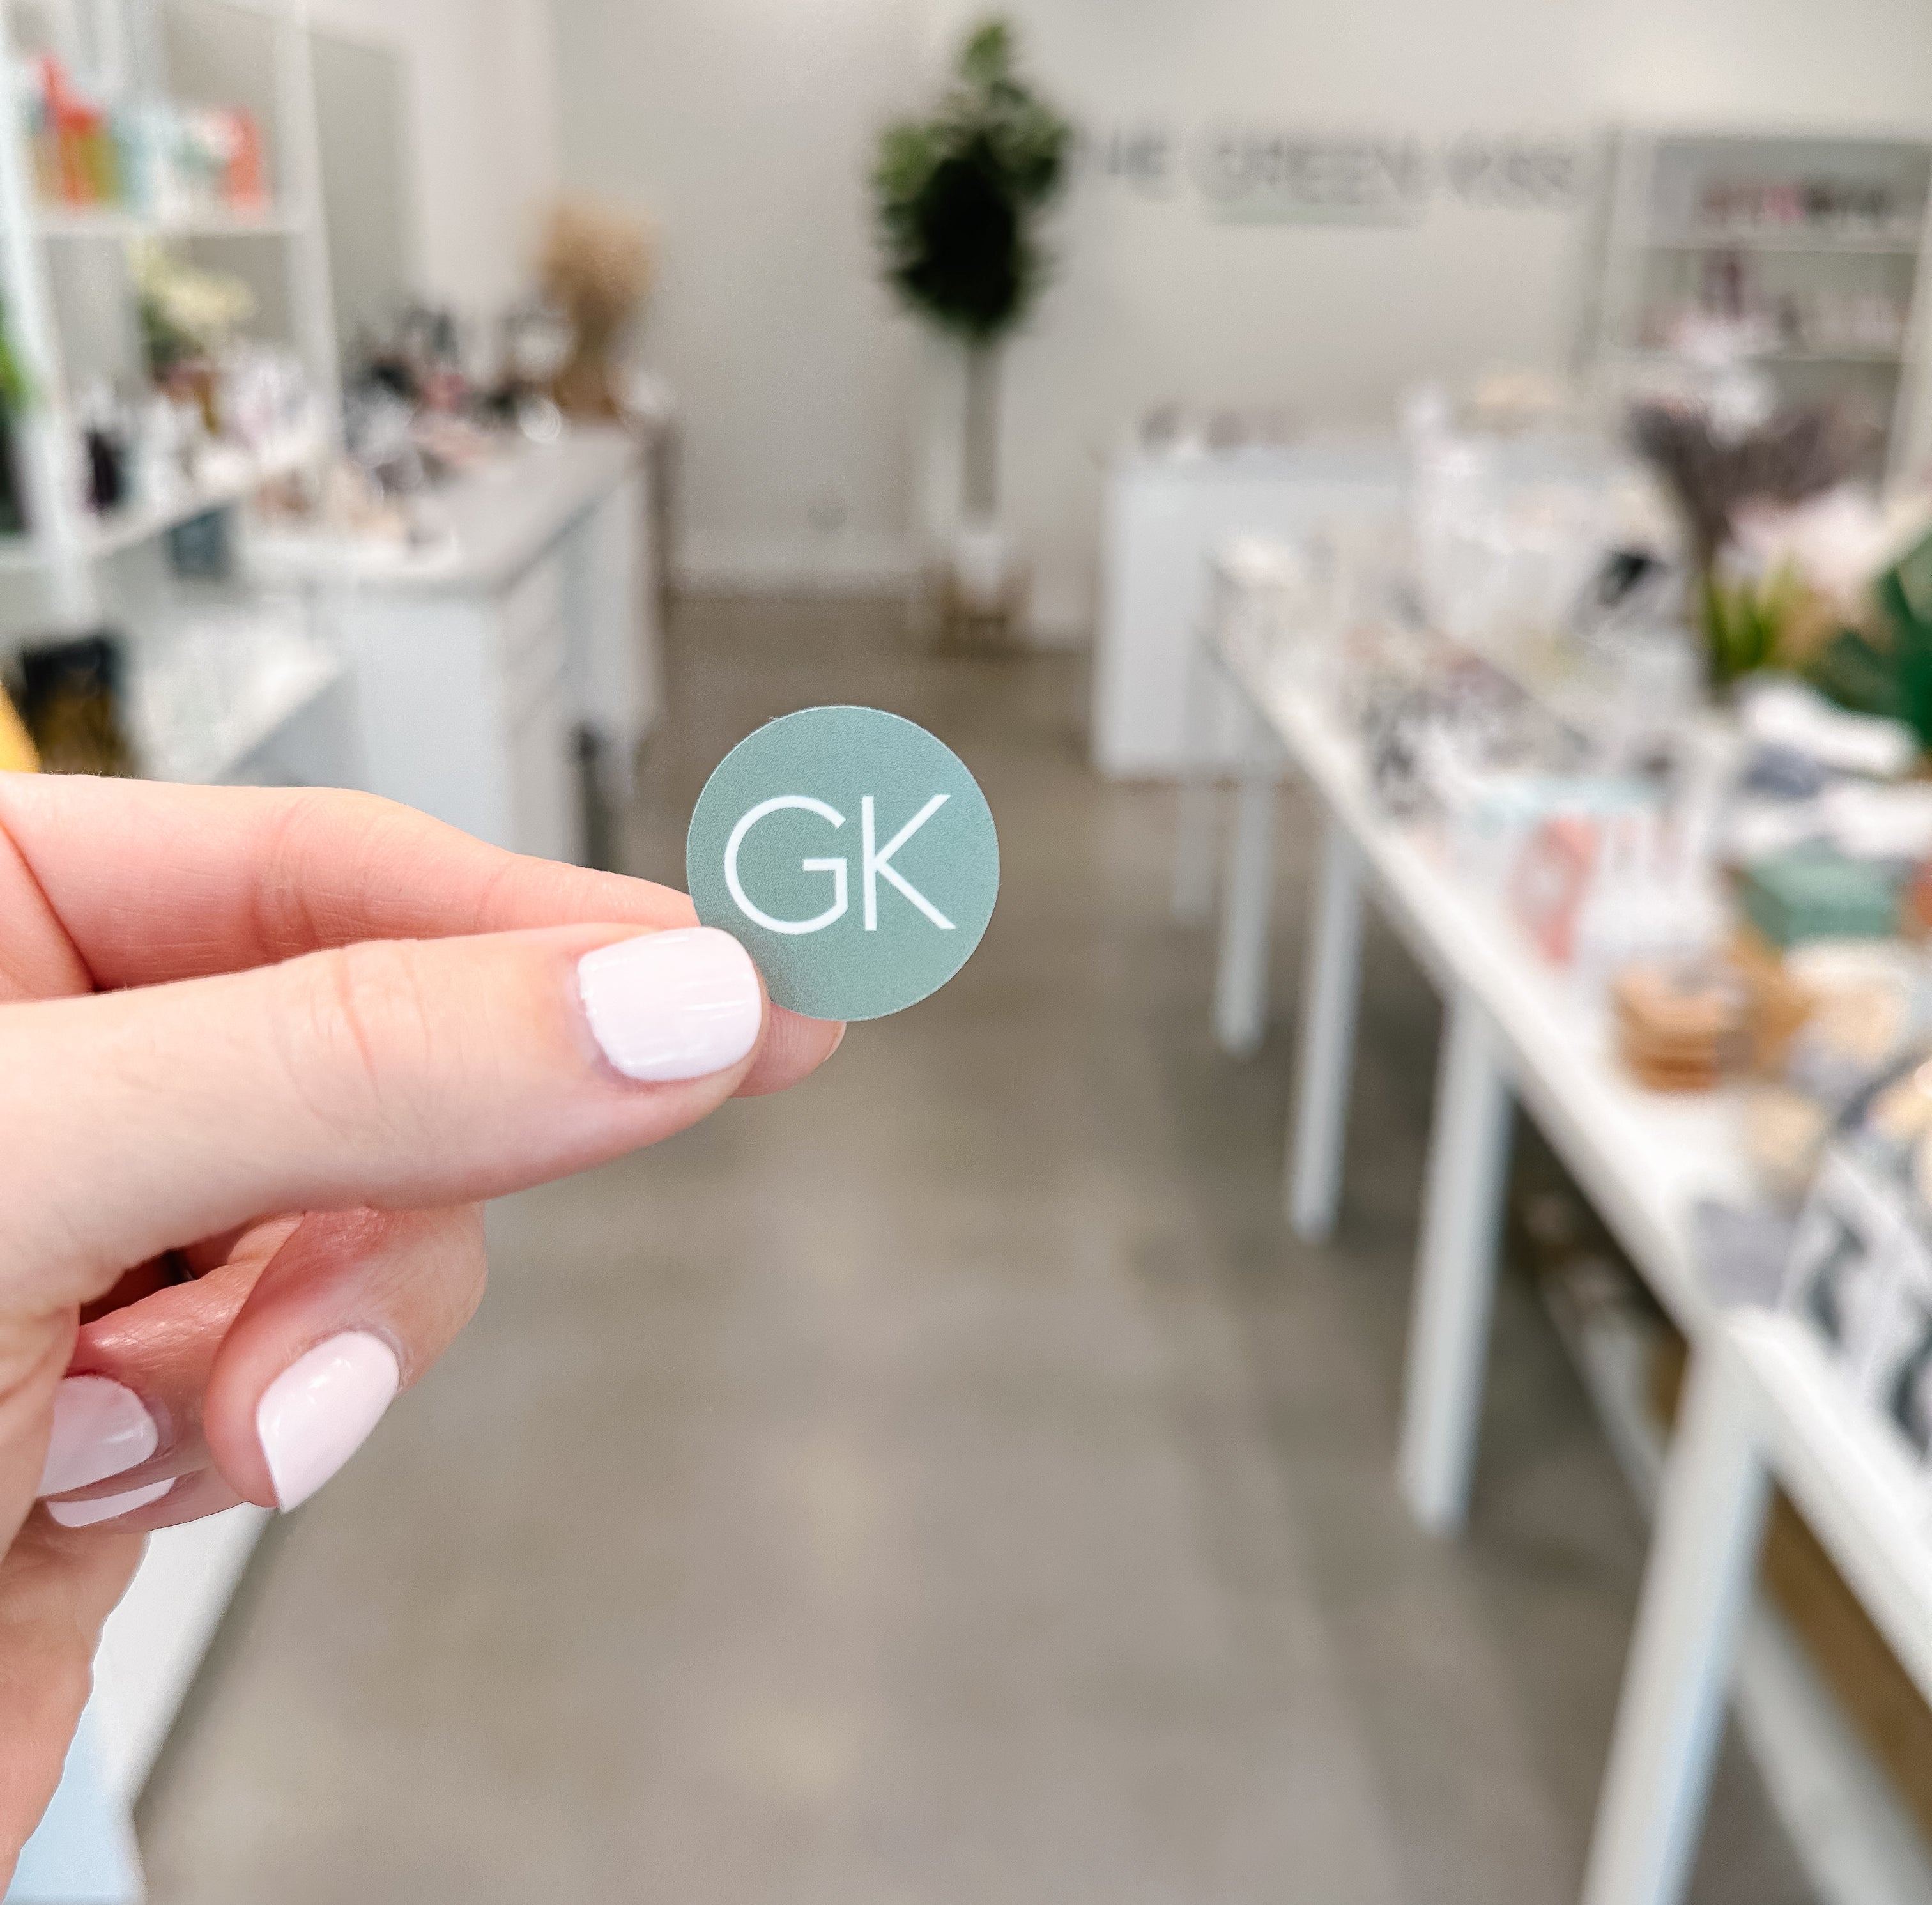 Compostable and sustainable shopping at The Green Kiss